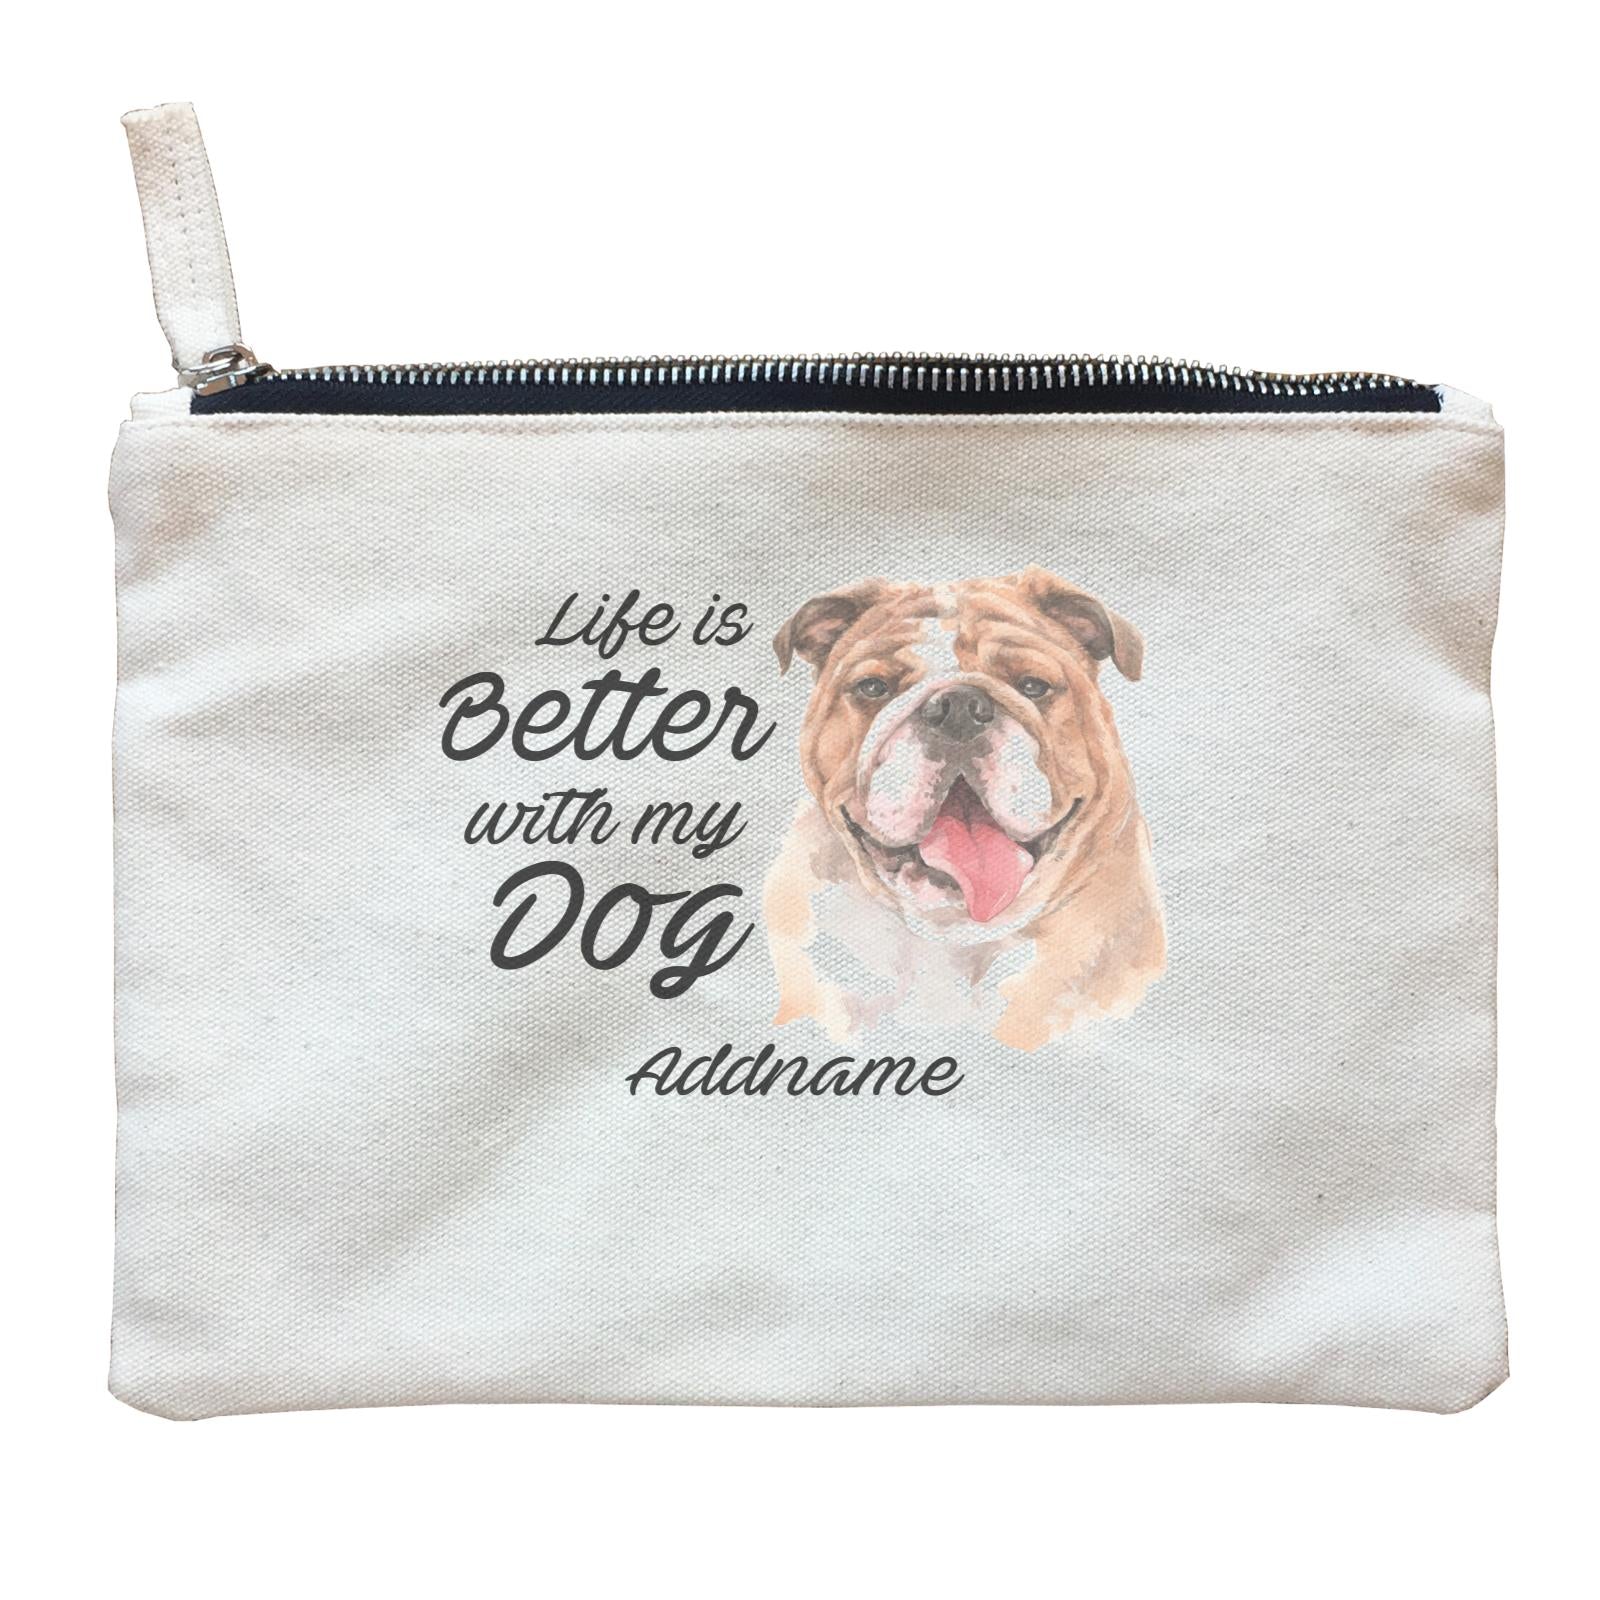 Watercolor Life is Better With My Dog Bulldog Addname Zipper Pouch